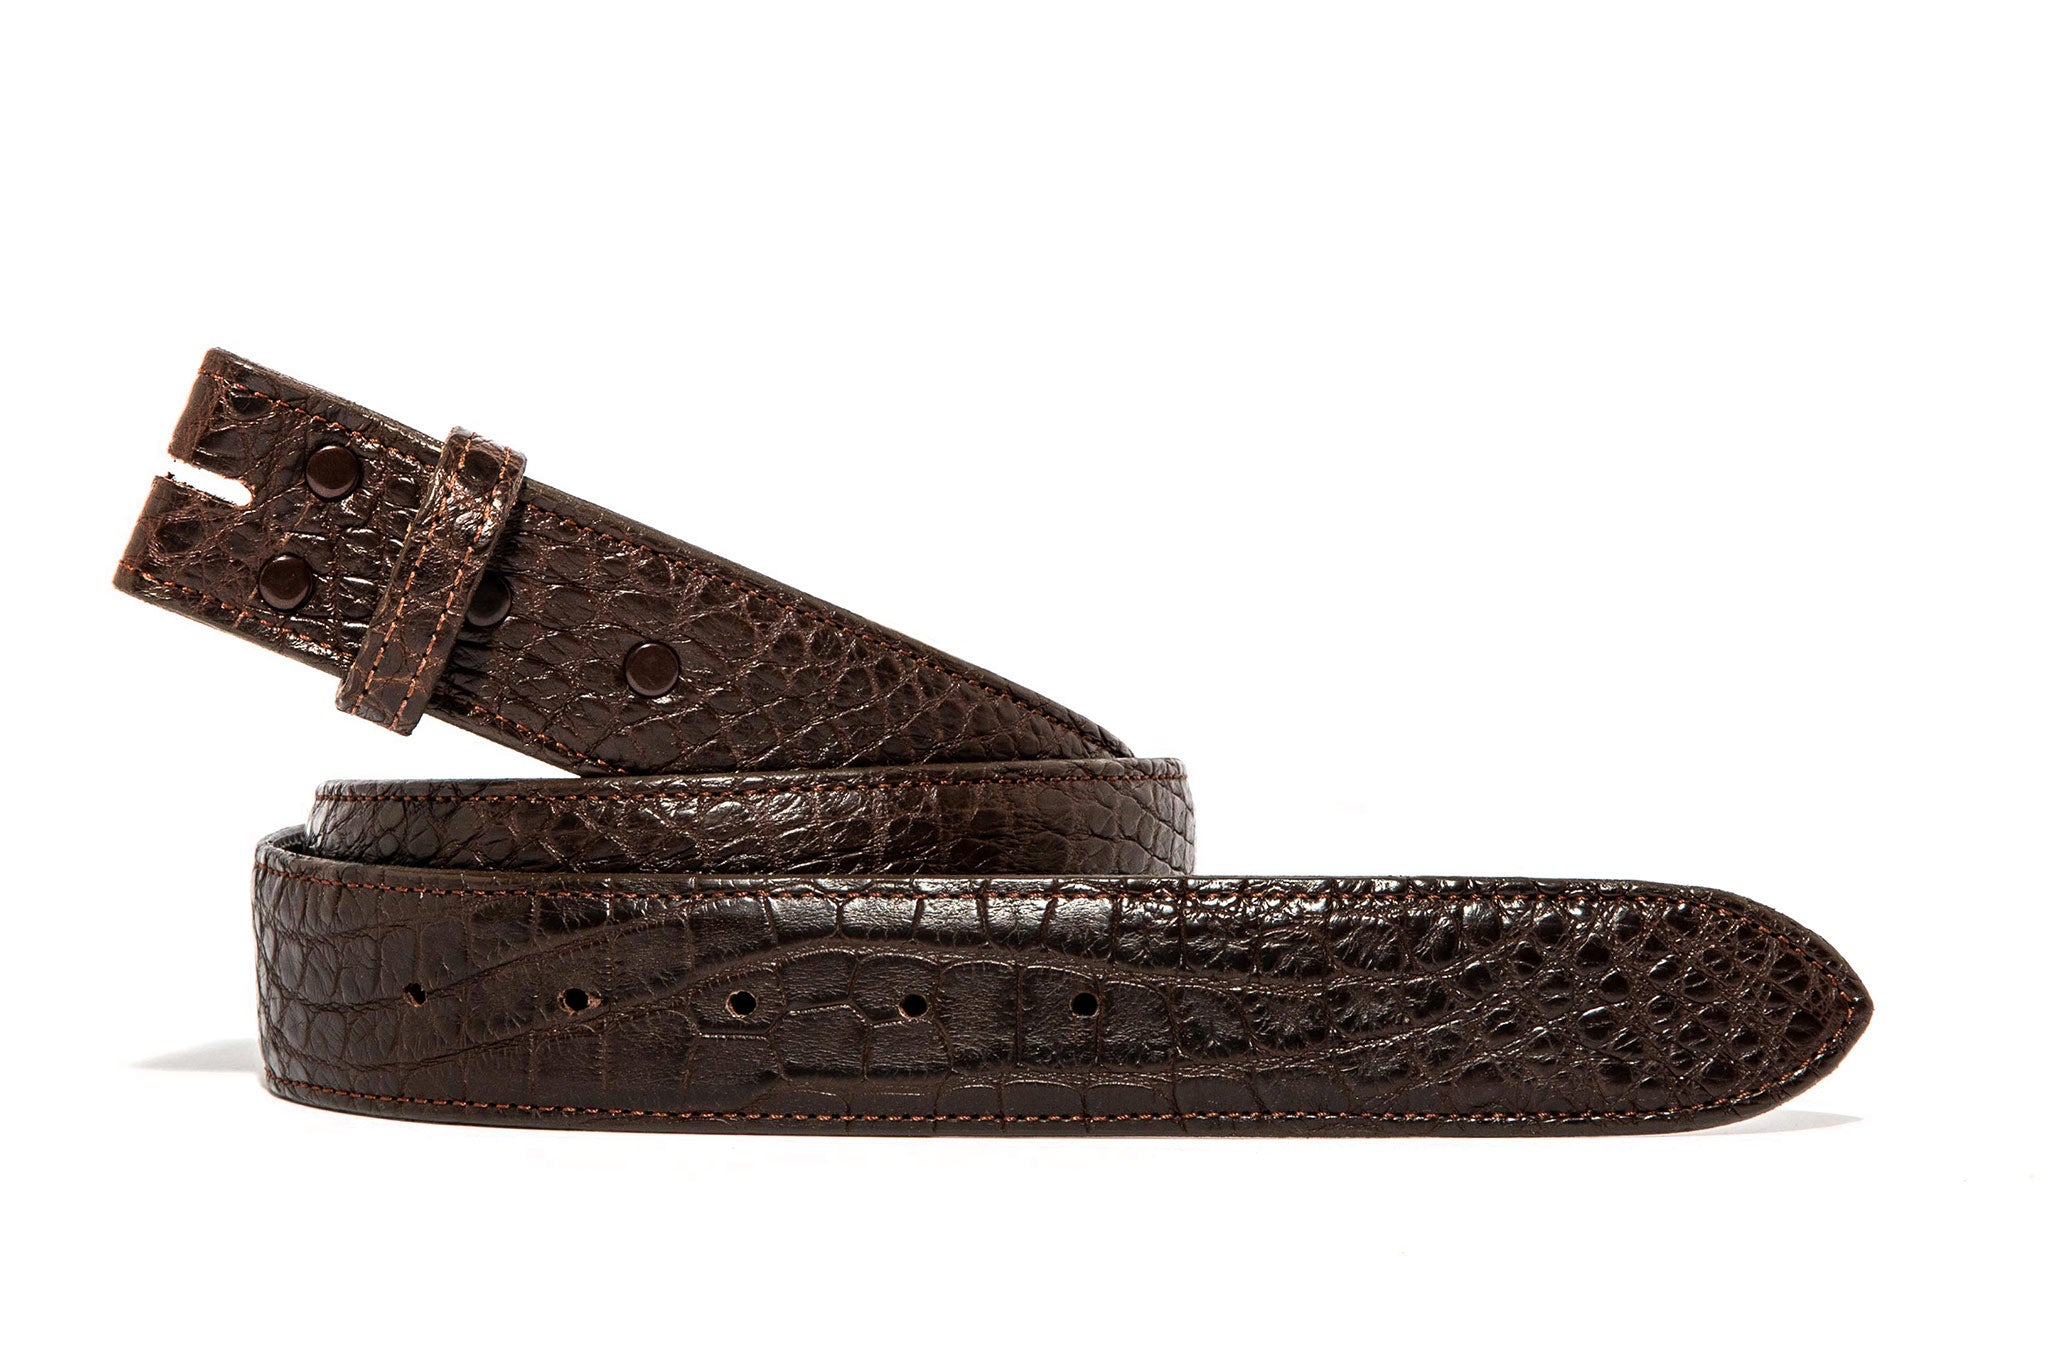 Chocolate Alligator Matte Strap | Belts And Buckles - Belts | Chacon